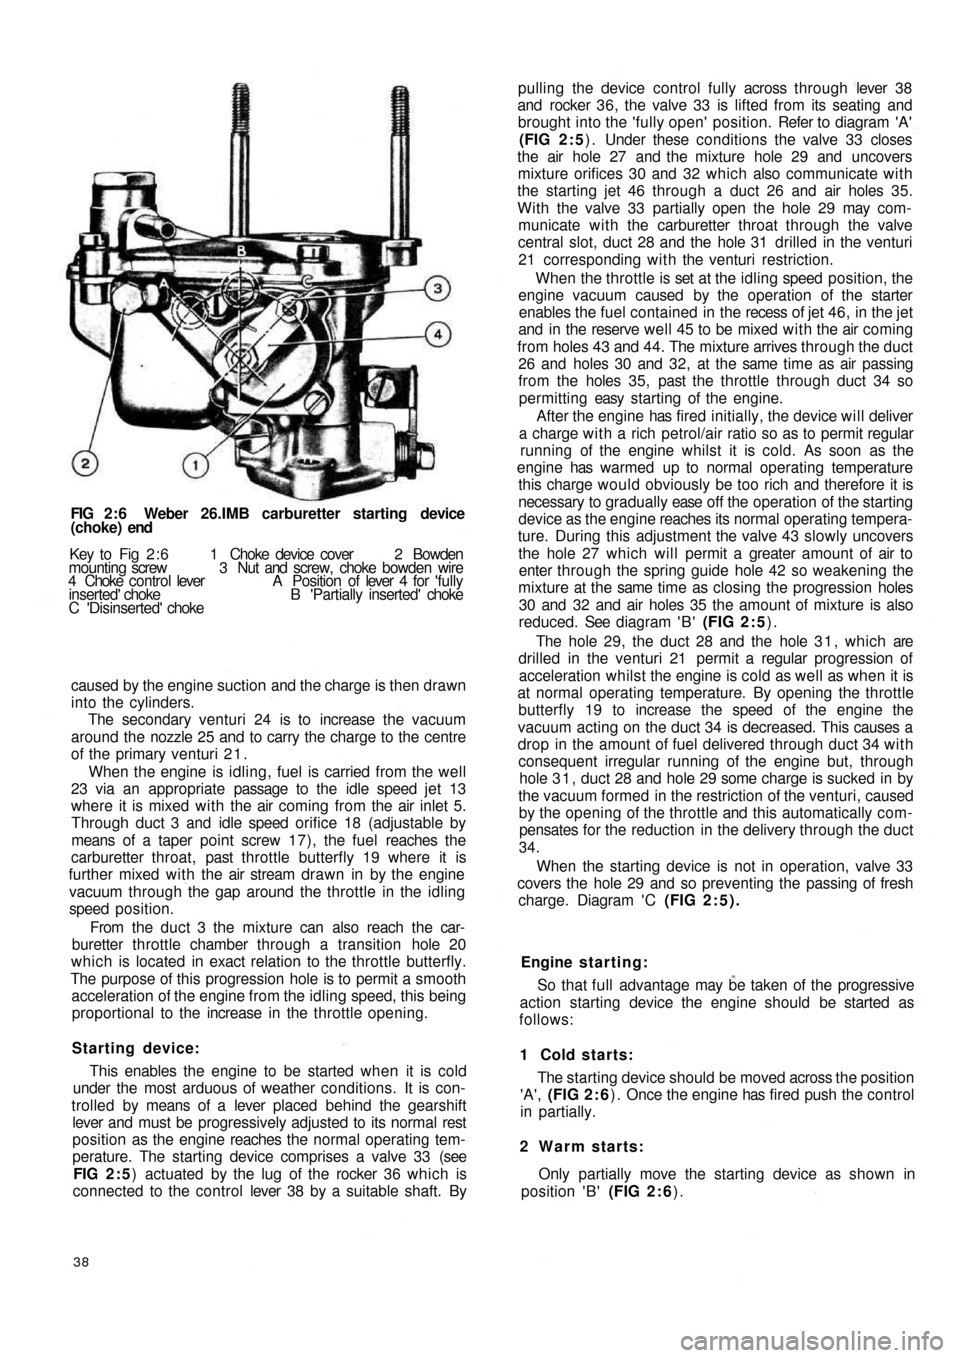 FIAT 500 1958 1.G Owners Manual FIG 2 : 6  Weber 26.IMB carburetter starting device
(choke) end
Key  to   Fig   2 : 6   1   Choke  device  cover   2  Bowden
mounting screw  3  Nut and screw, choke bowden wire
4  Choke  control lever